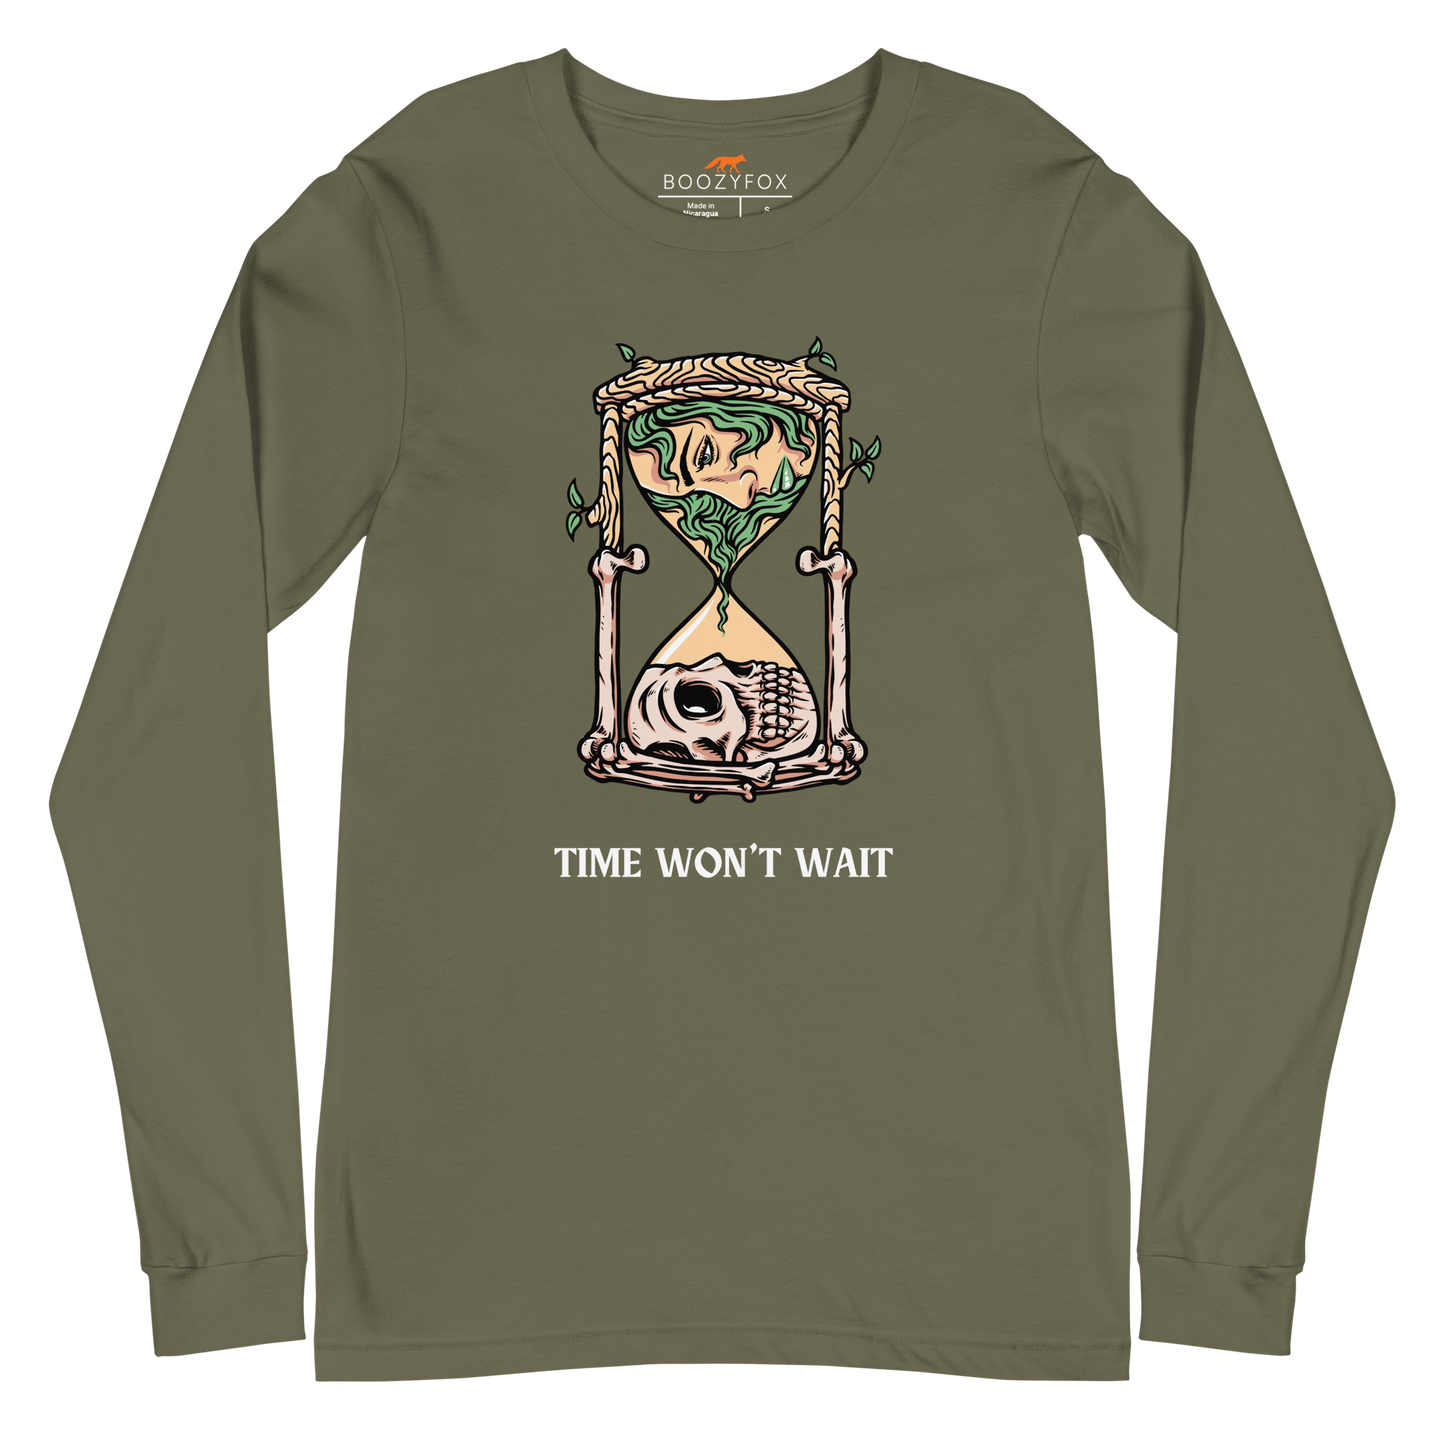 Military Green Hourglass Long Sleeve Tee featuring a captivating Time Won't Wait graphic on the chest - Cool Hourglass Long Sleeve Graphic Tees - Boozy Fox